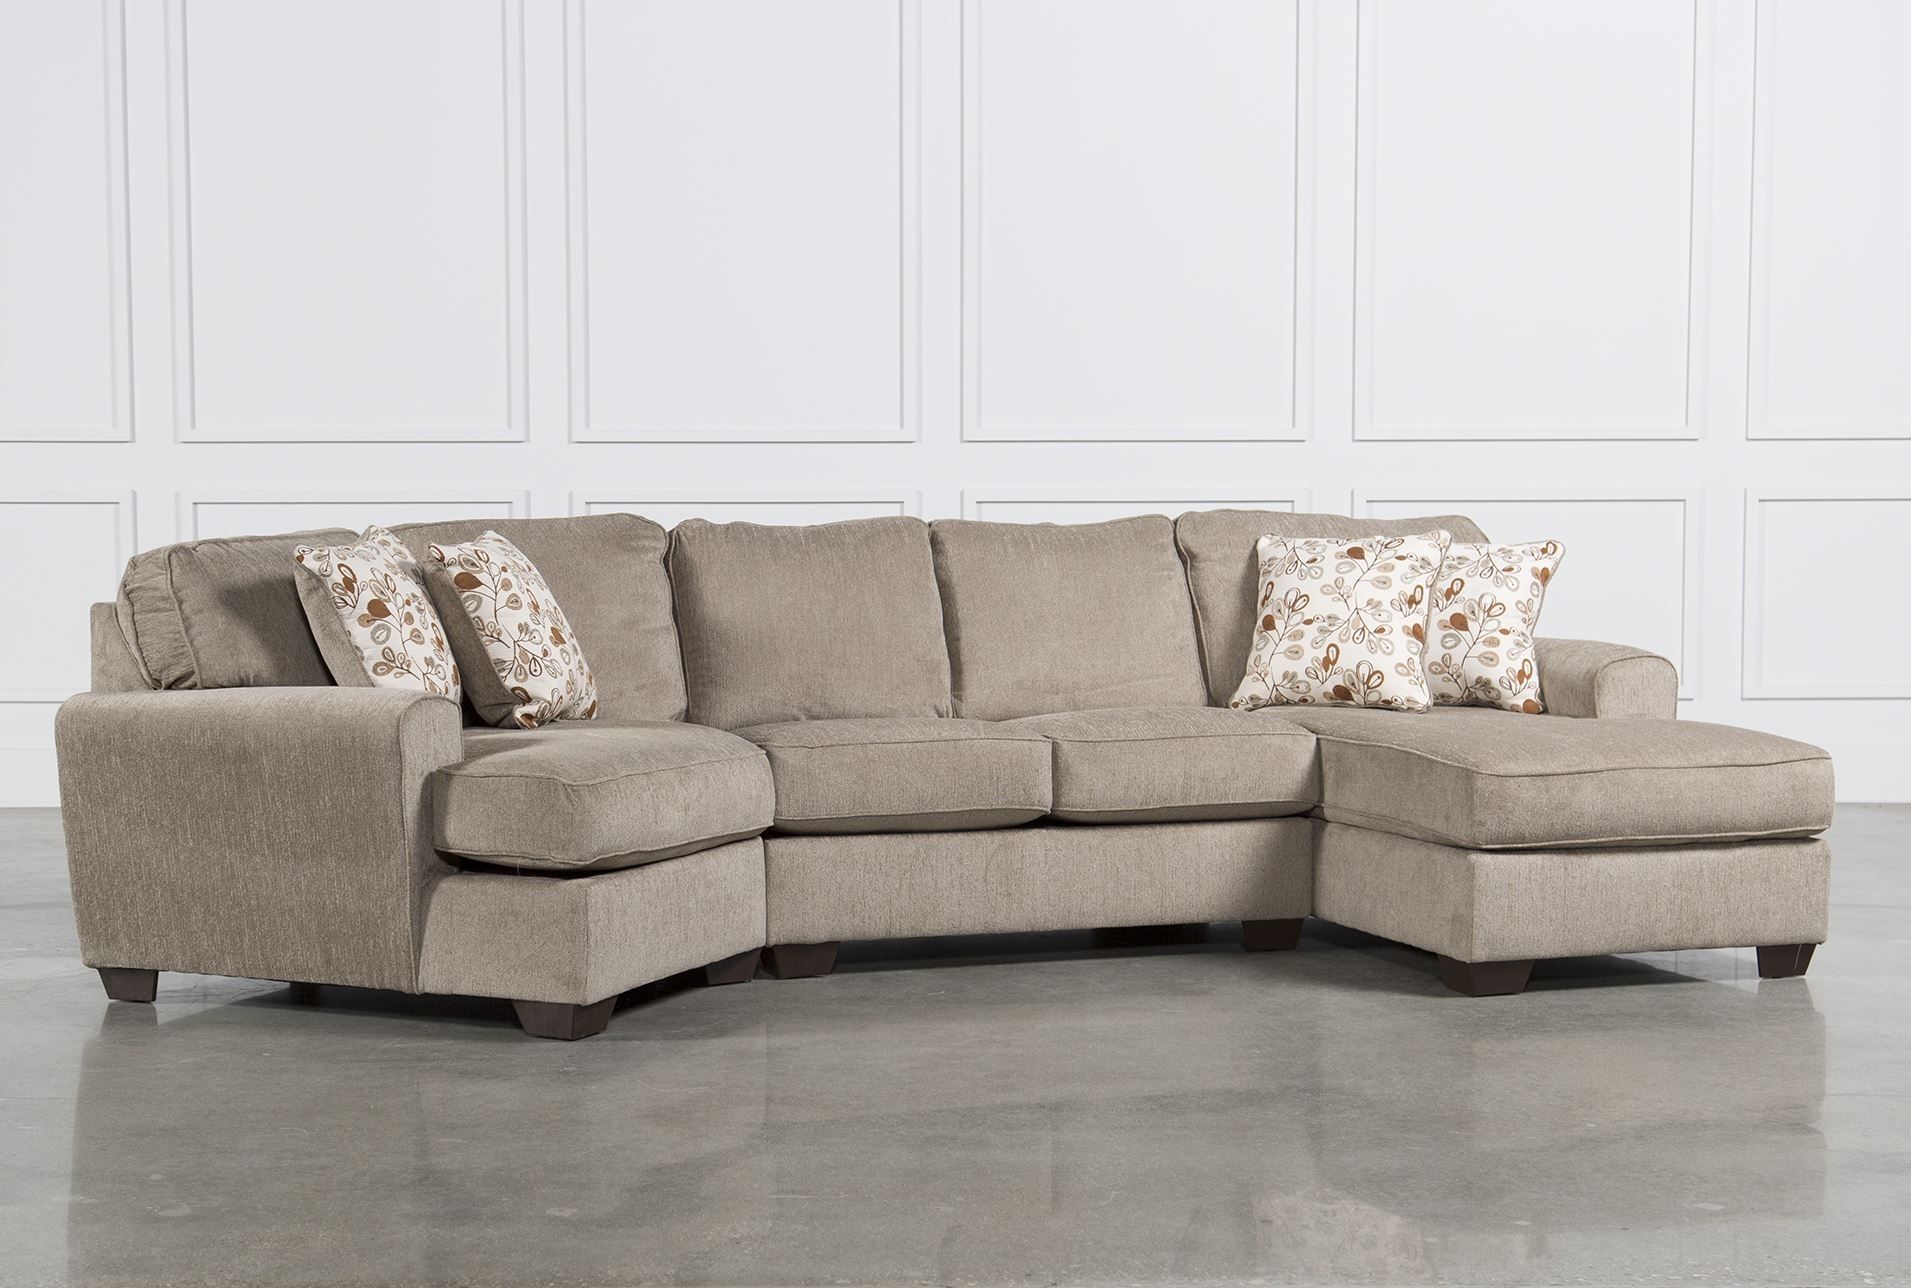 Furniture : Sectional Sofa Gta Sectional Couch El Paso Sectional Throughout Gta Sectional Sofas (Photo 1 of 10)